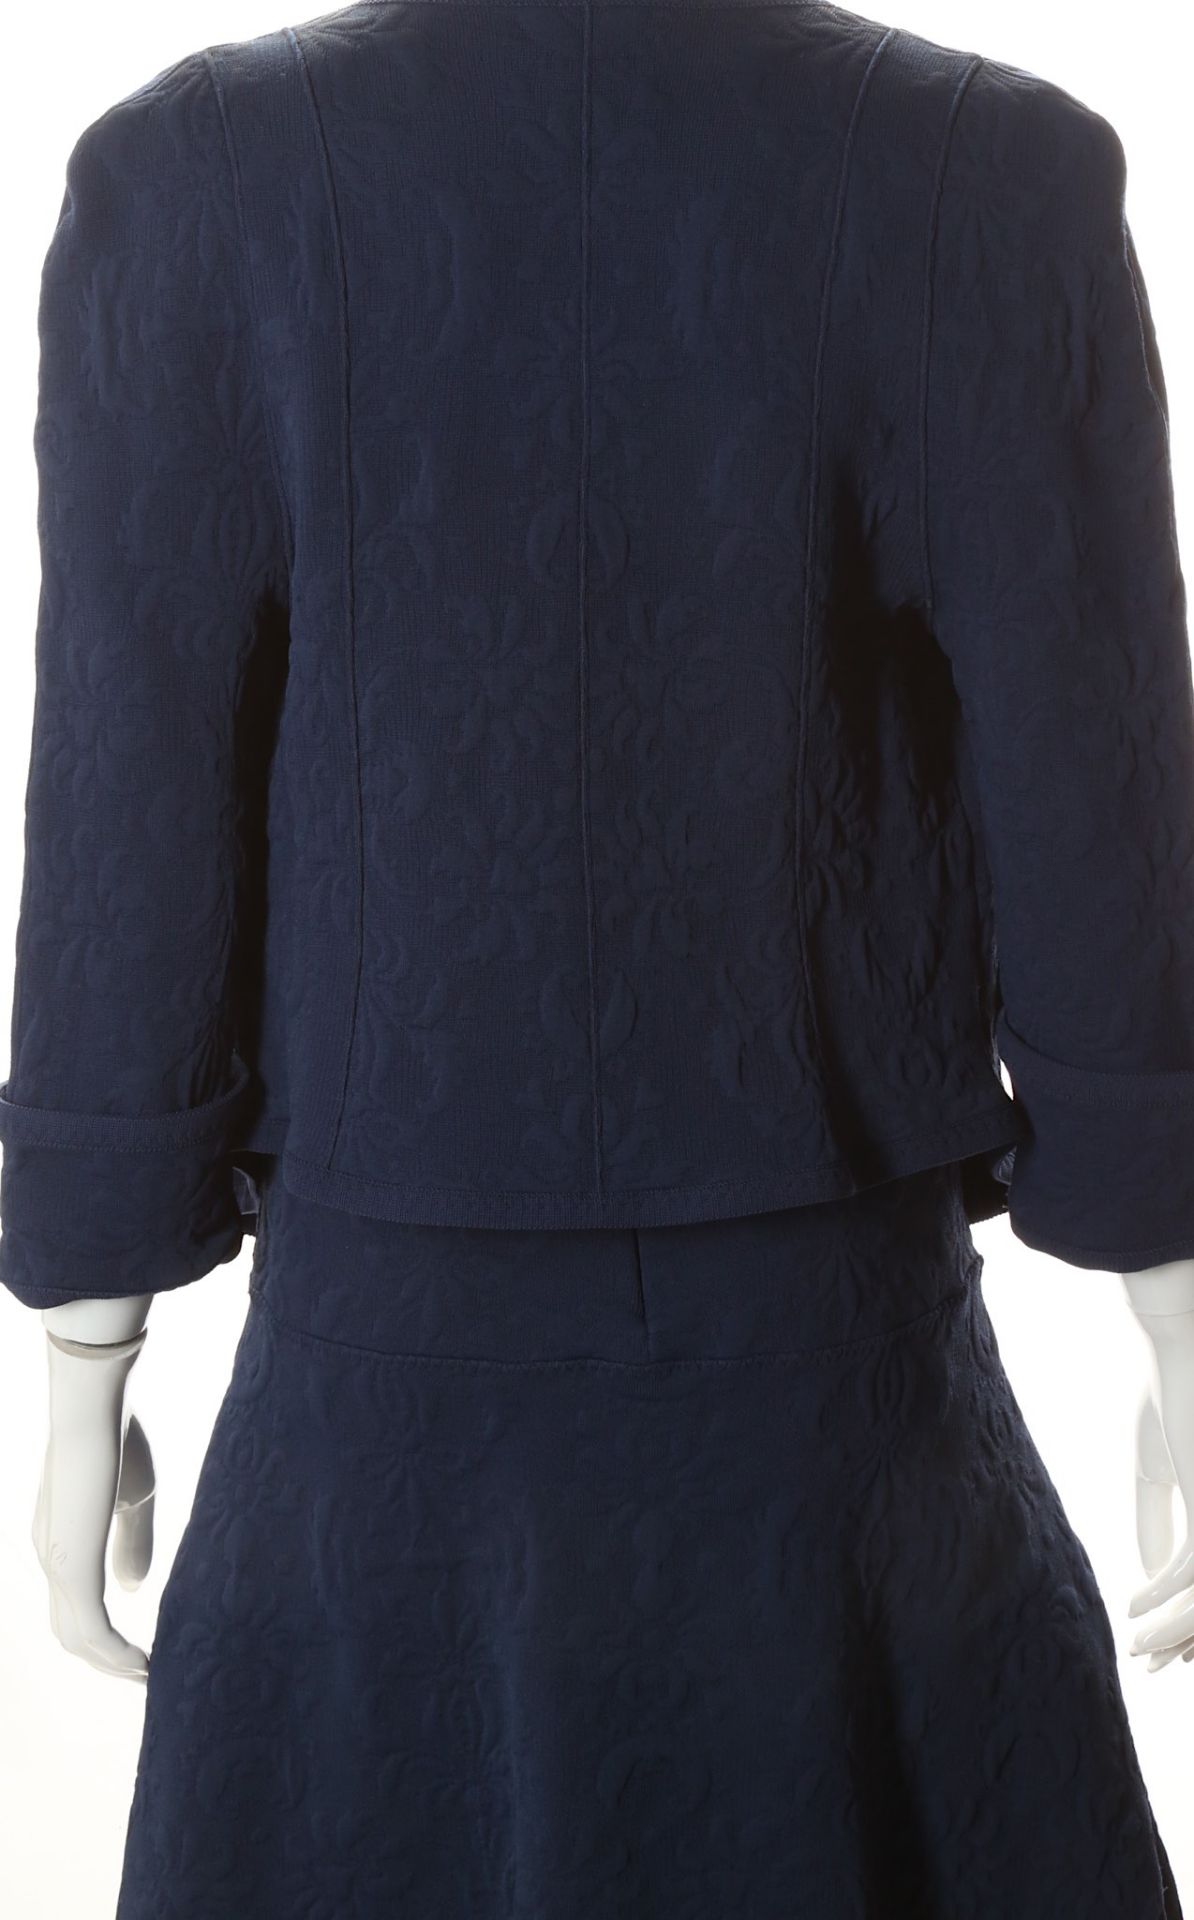 Chanel Navy Blue Jacket and Dress, 2010s, raised b - Image 4 of 7